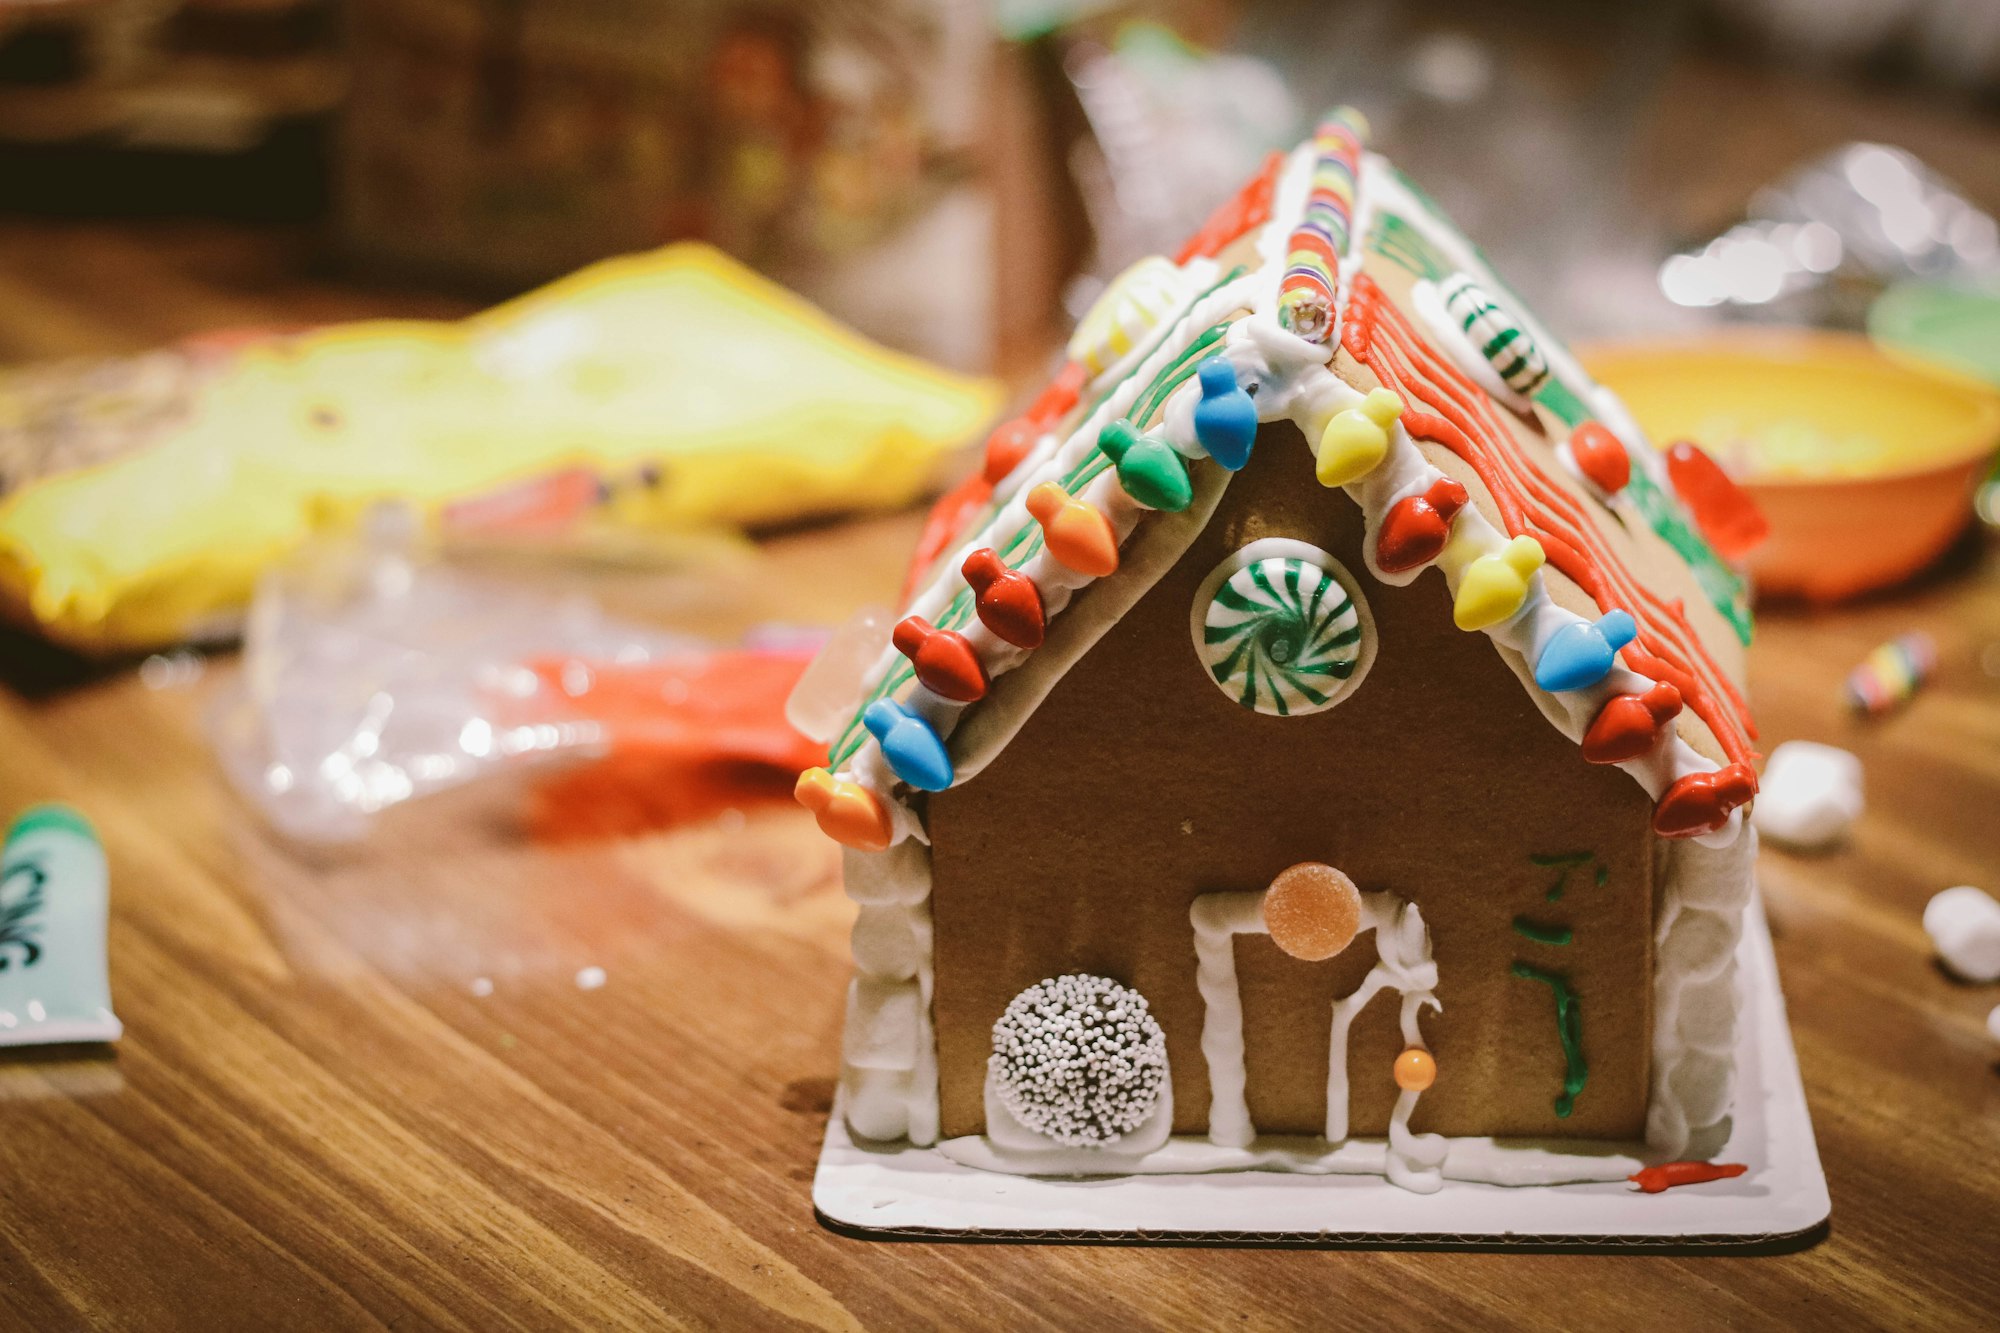 Gingerbread house with candy and other Christmas decorations.